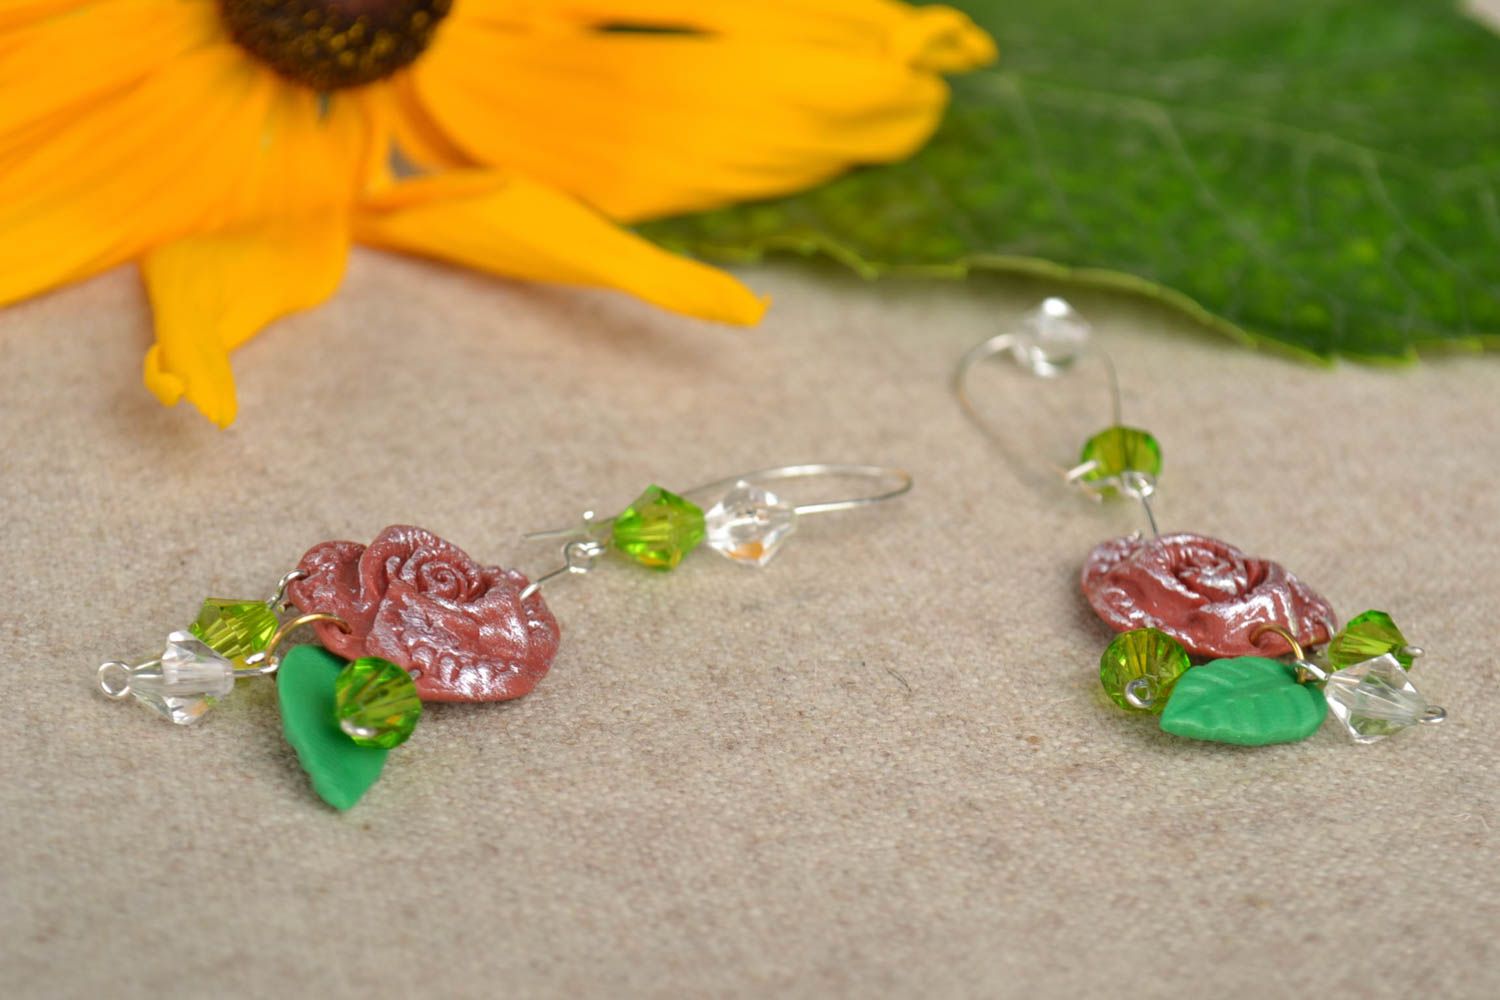 Designer earrings flower earrings polymer clay handcrafted jewelry gifts for her photo 1